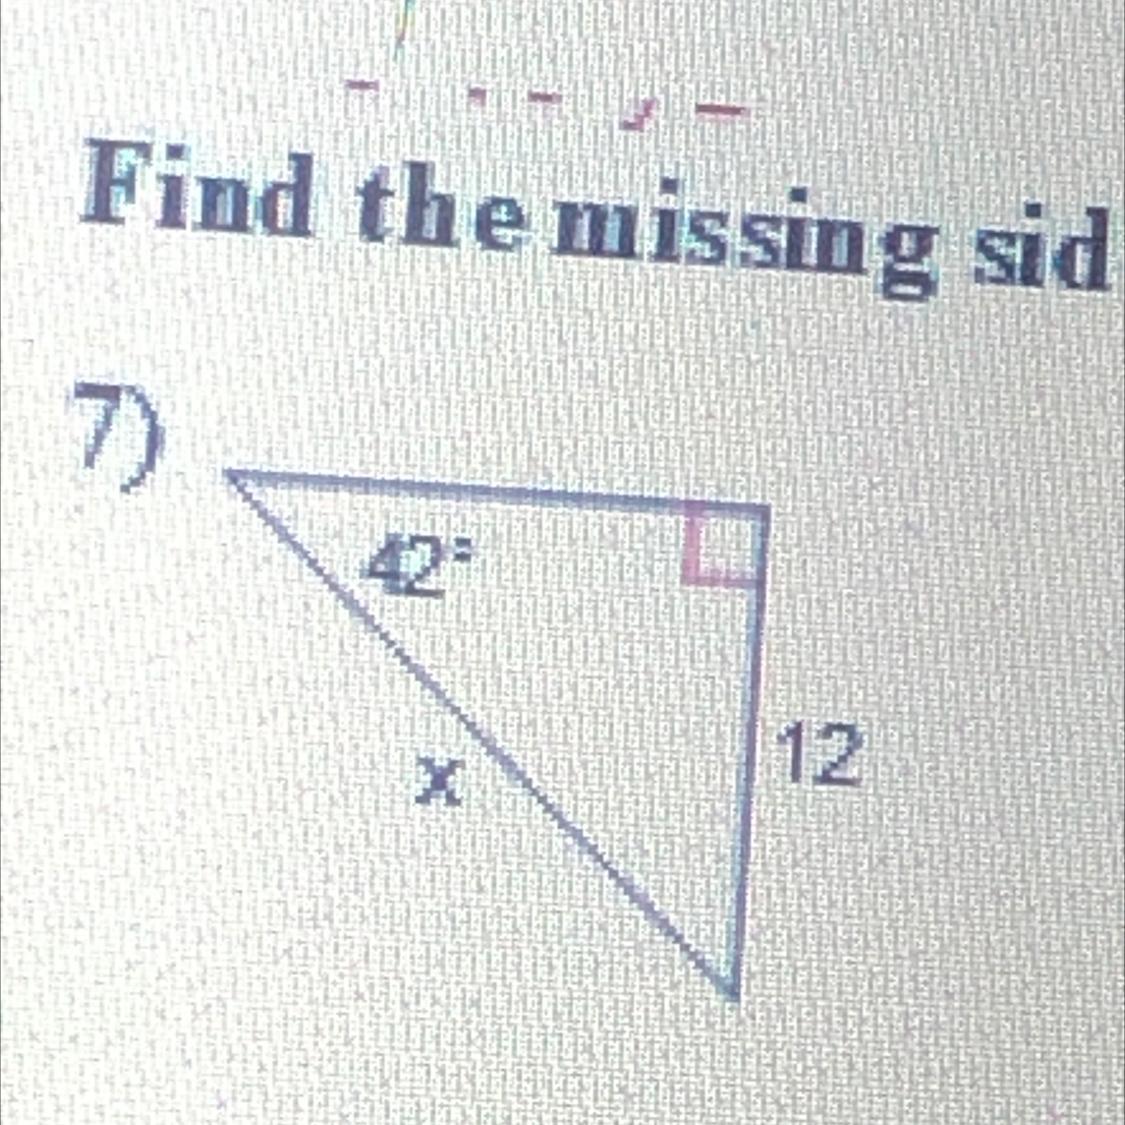 Find The Missing Sign.Solve For X 